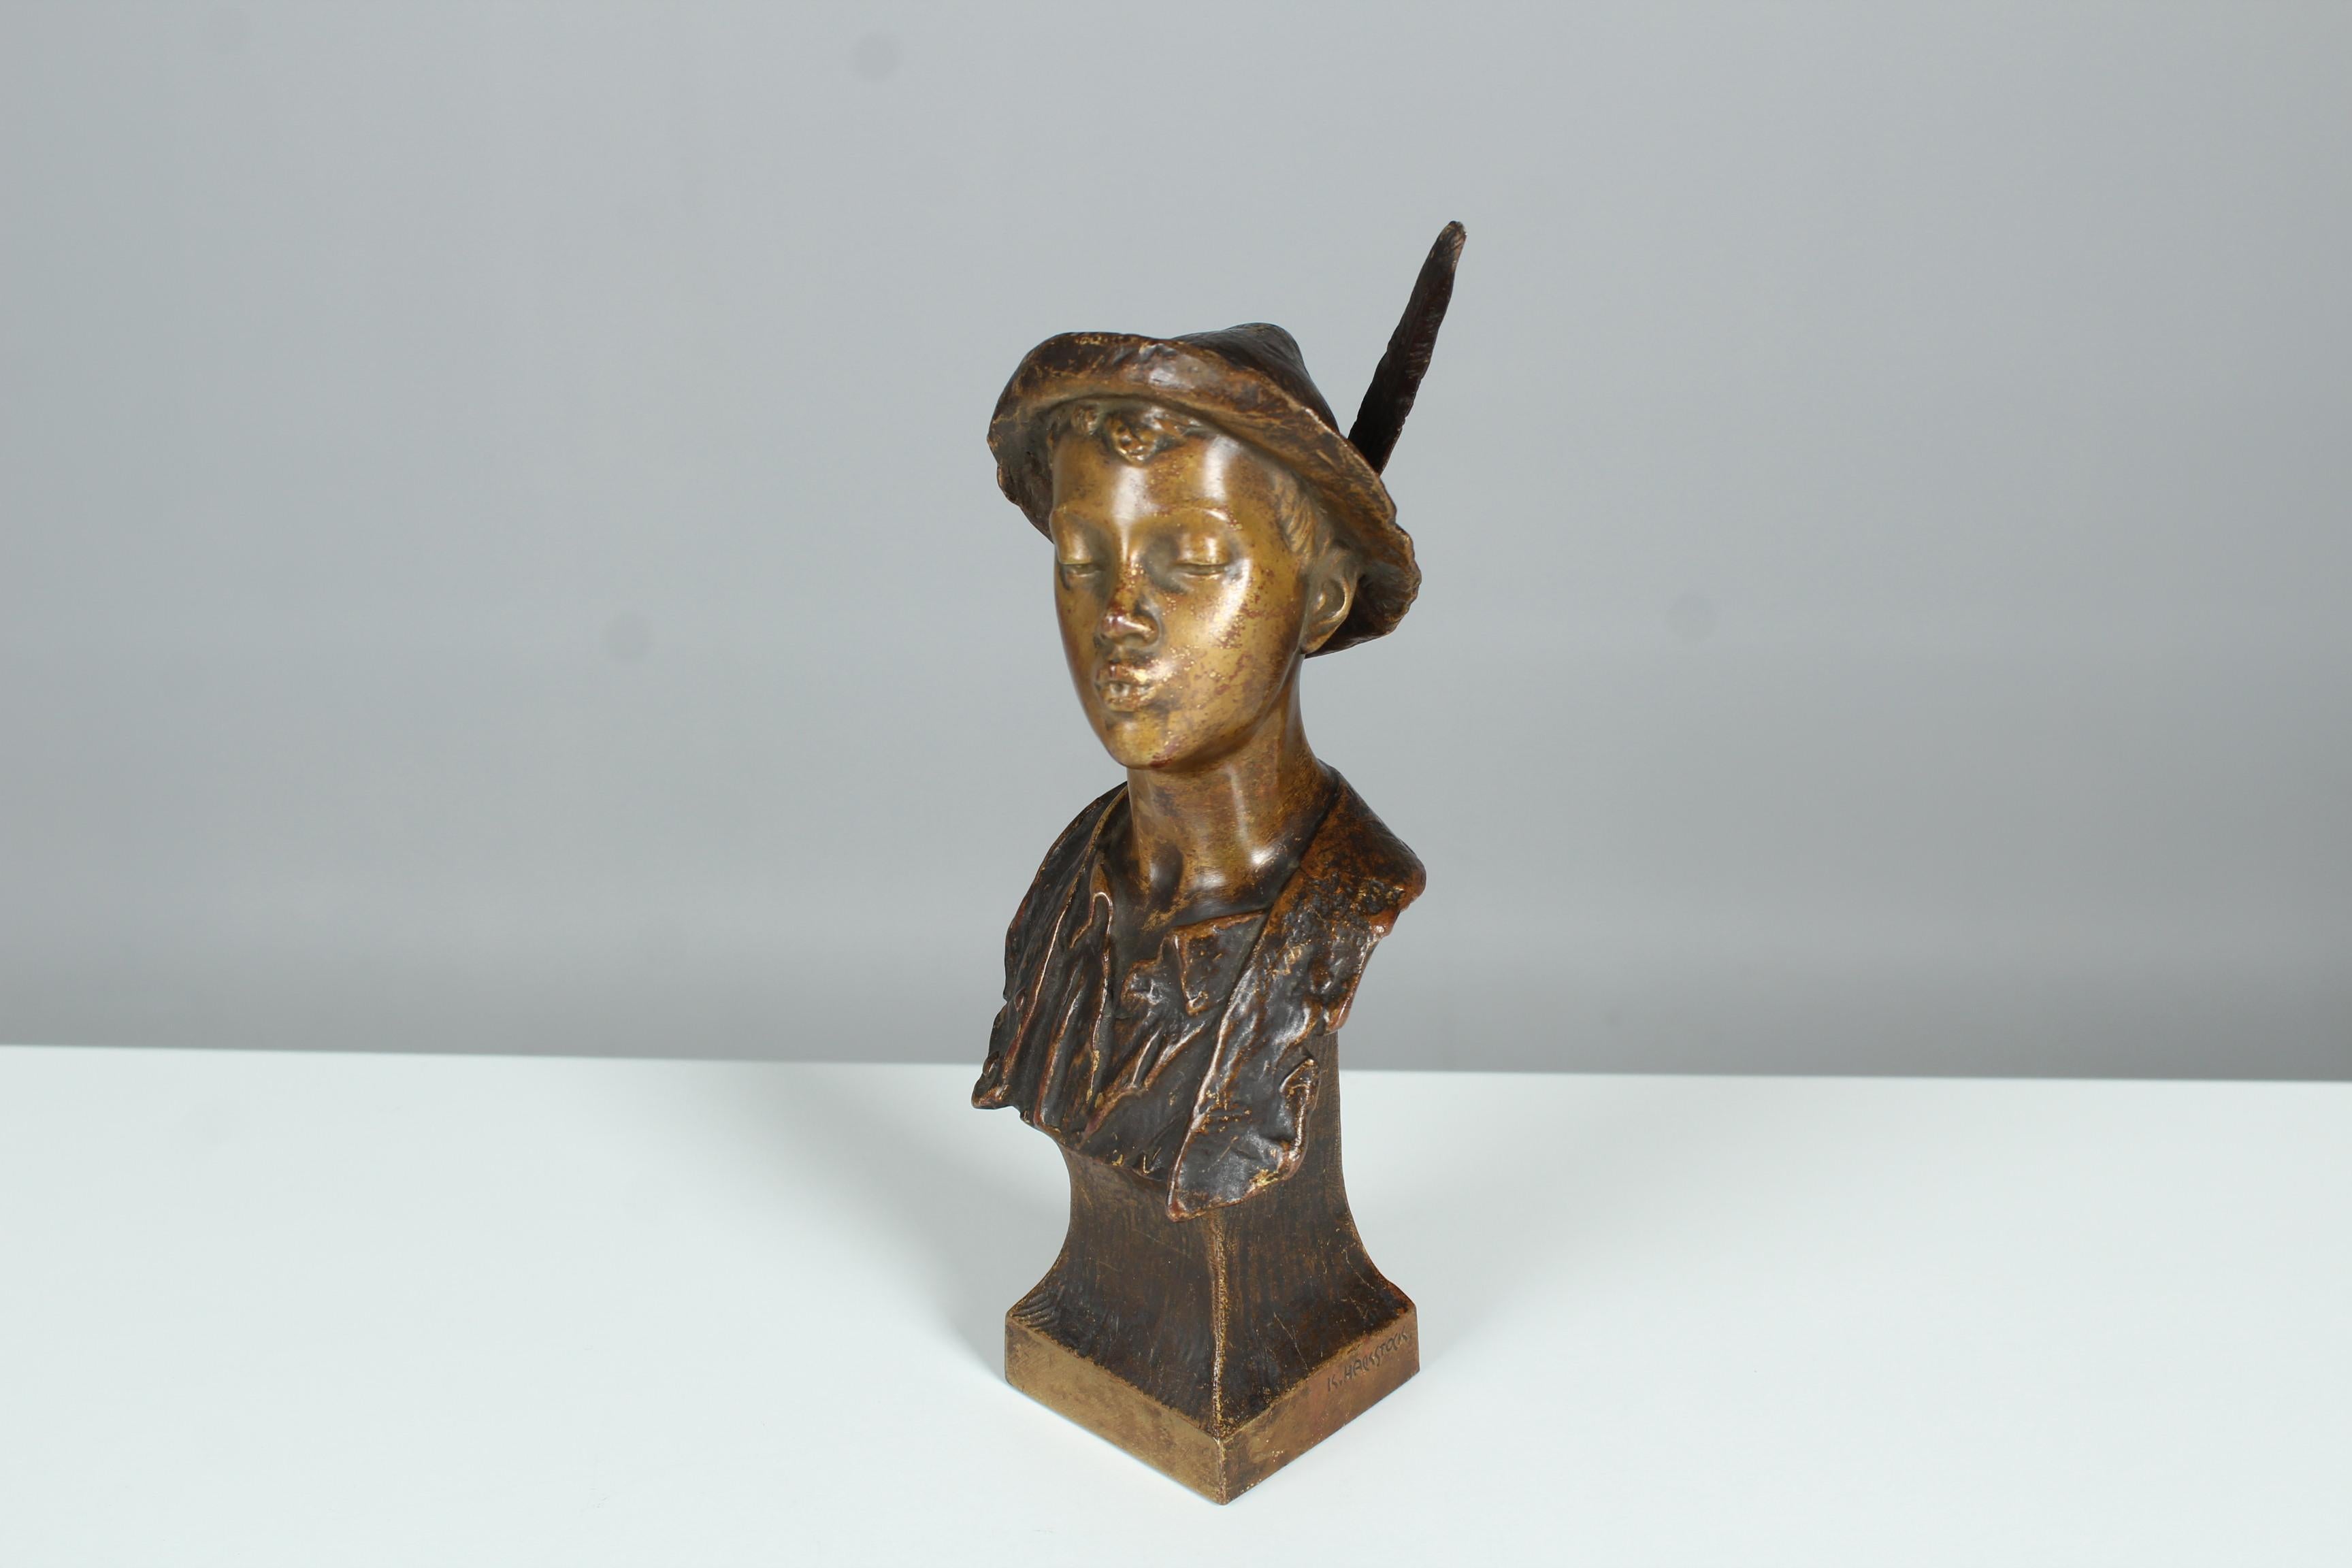 Beautiful antique sculpture by the austrian sculptor and portrait painter Karl Hackstock (*1855 in Fehring - 1919 in Vienna).
Karl Hackstock studied at the Academy in Vienna, which awarded him several prizes.
This beautiful bronze bust shows a